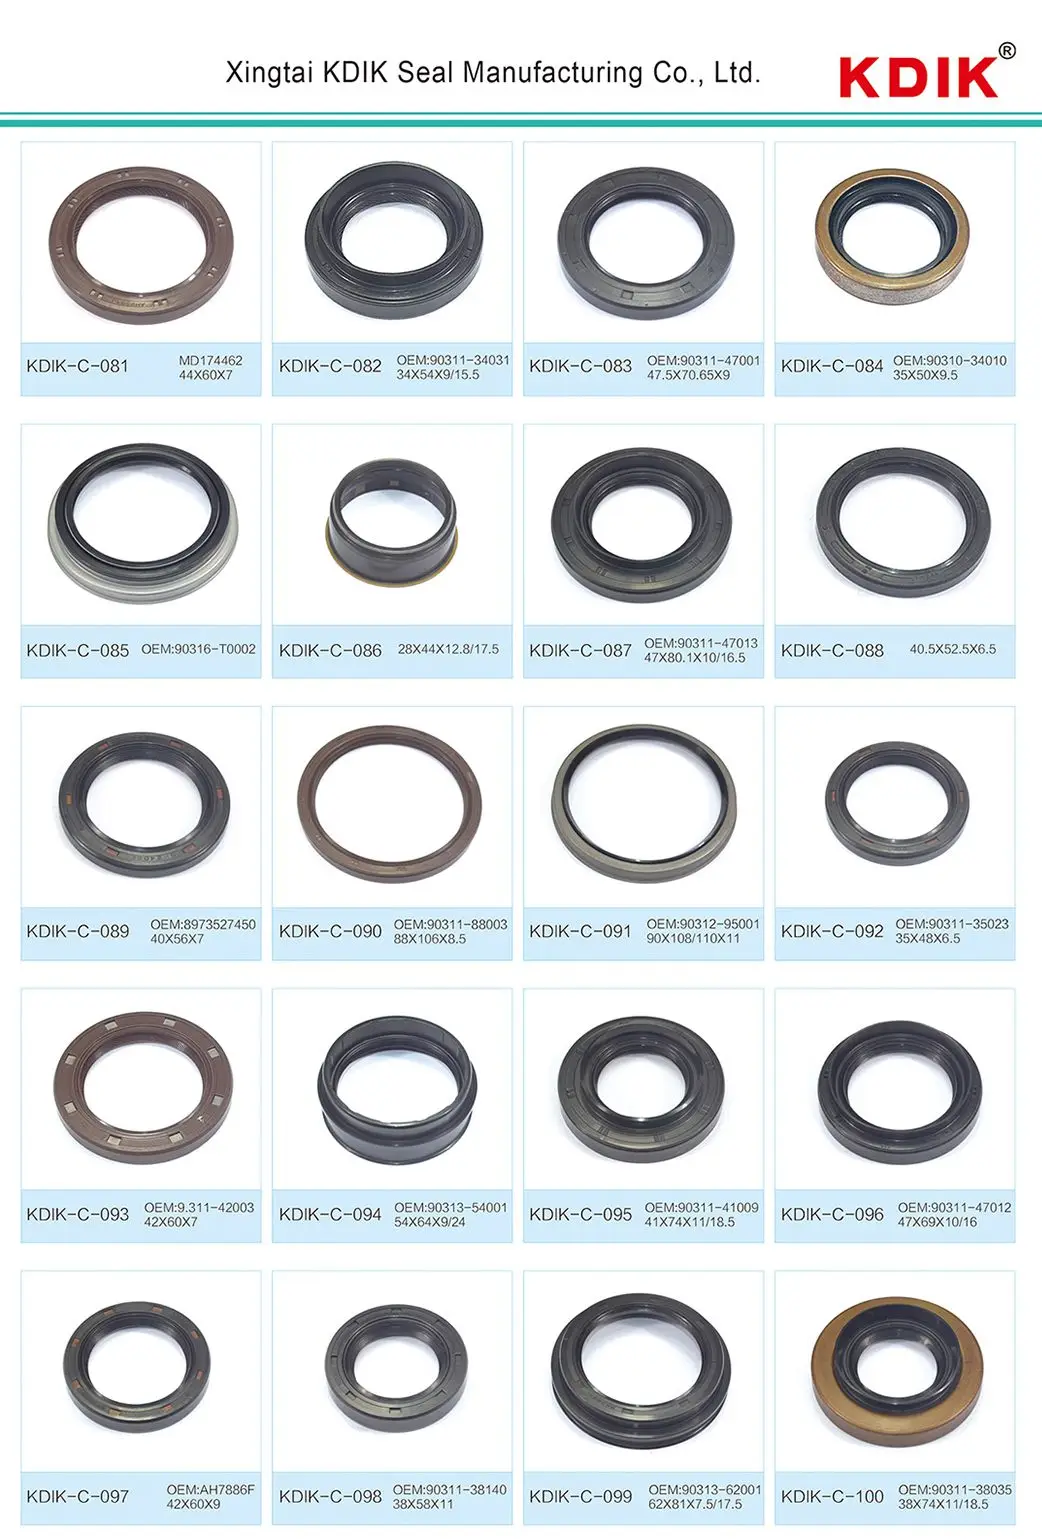 43*58*8 Oil Seal/ Oil Seal Mk043a3/ 90311-43008 / 90311-43007 With 43 ...